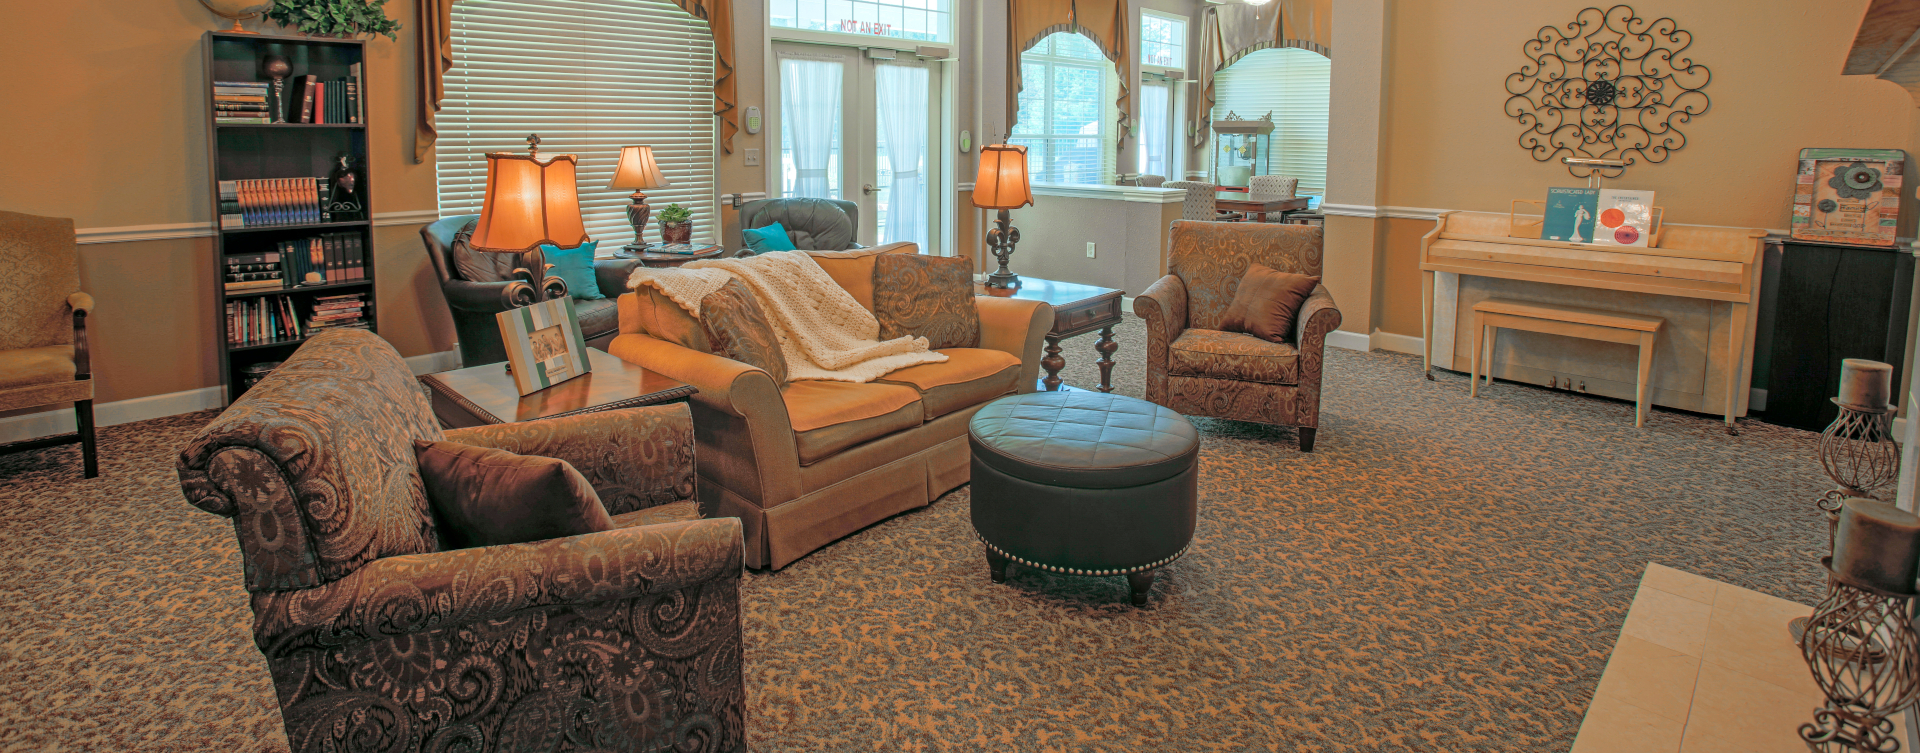 Enjoy a good book in the living room at Bickford of Wabash